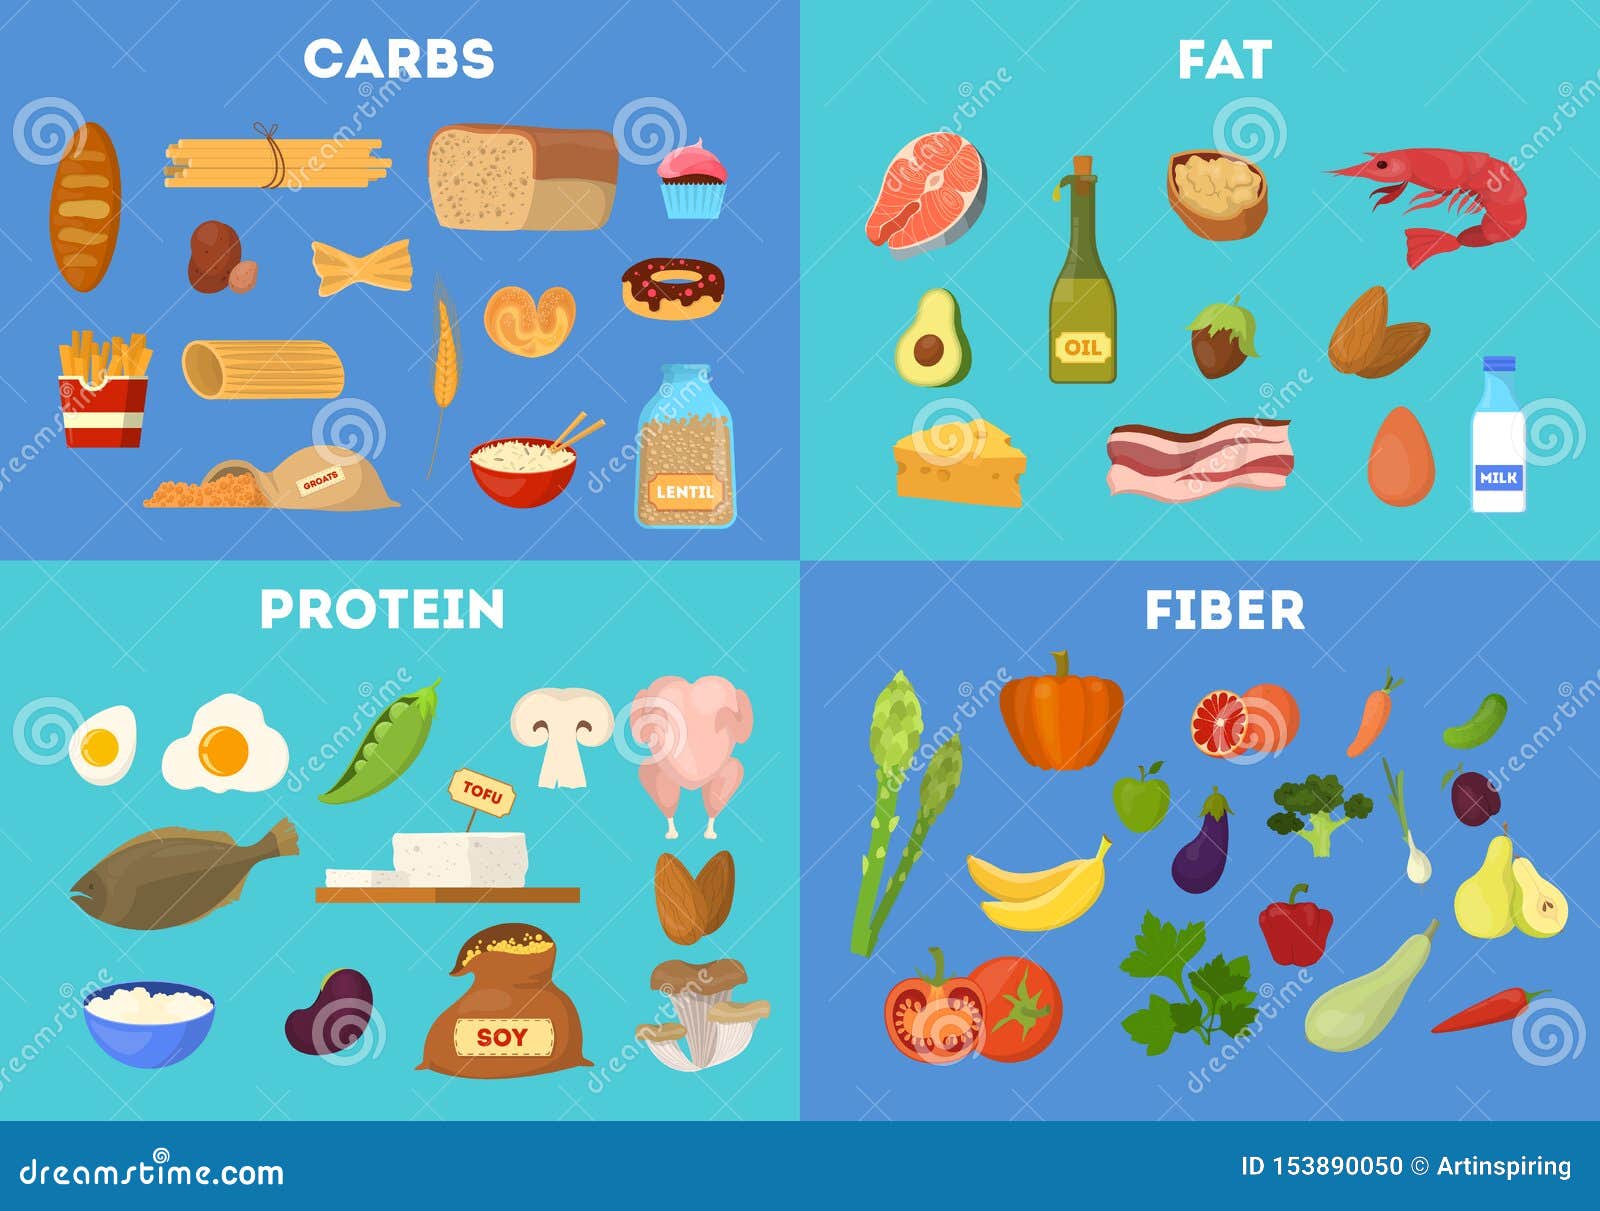 Carbohydrates Proteins And Fats Chart